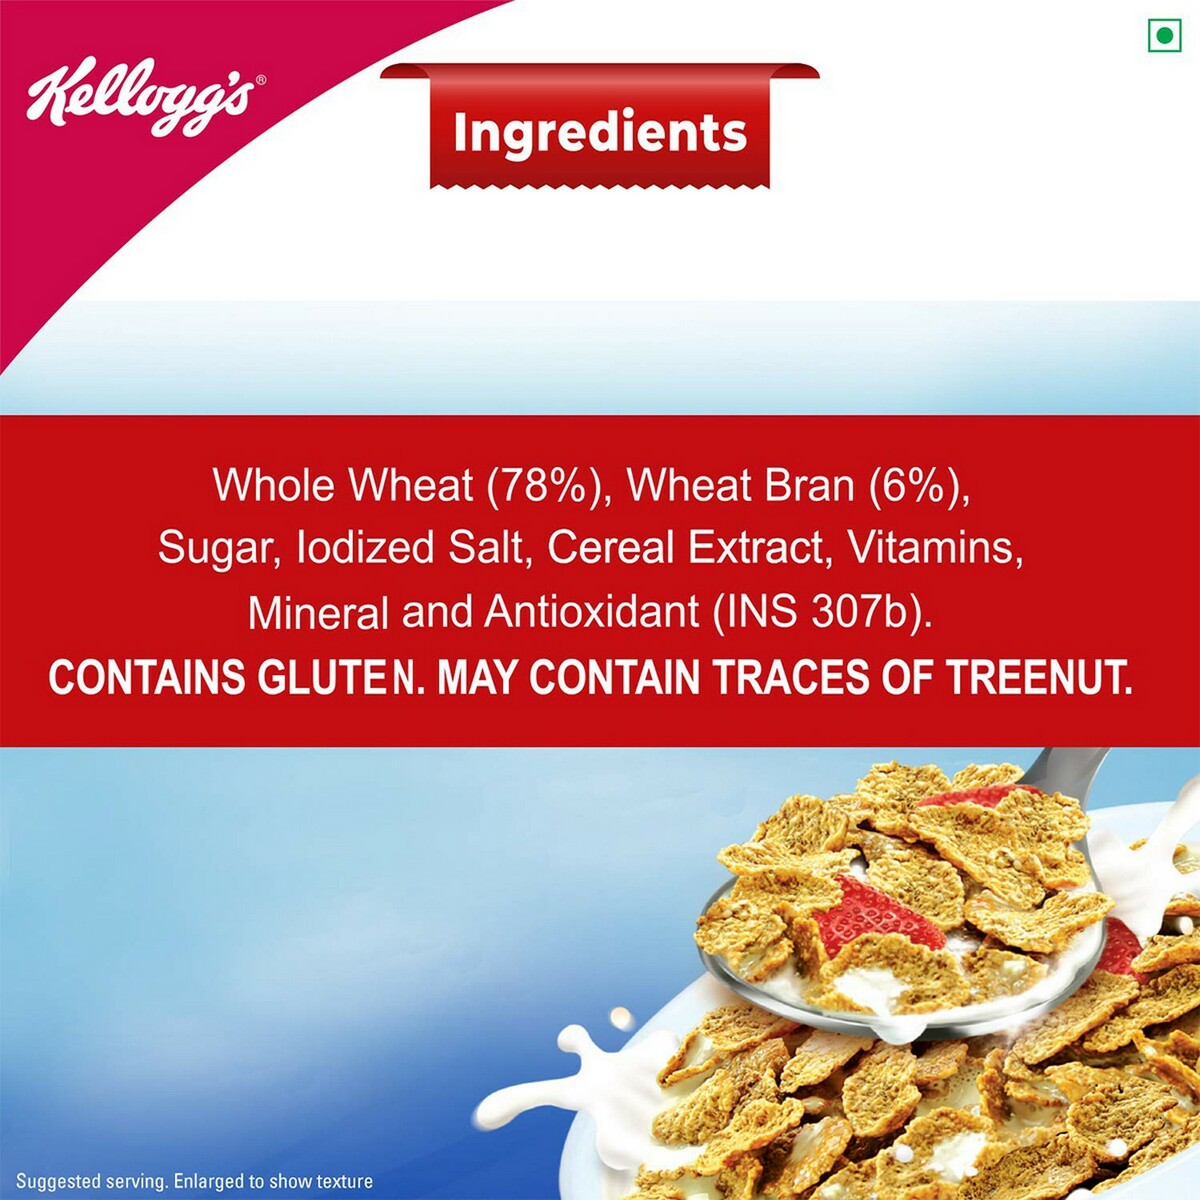 Kellogg's All Bran Wheat Flakes Cereal 425g